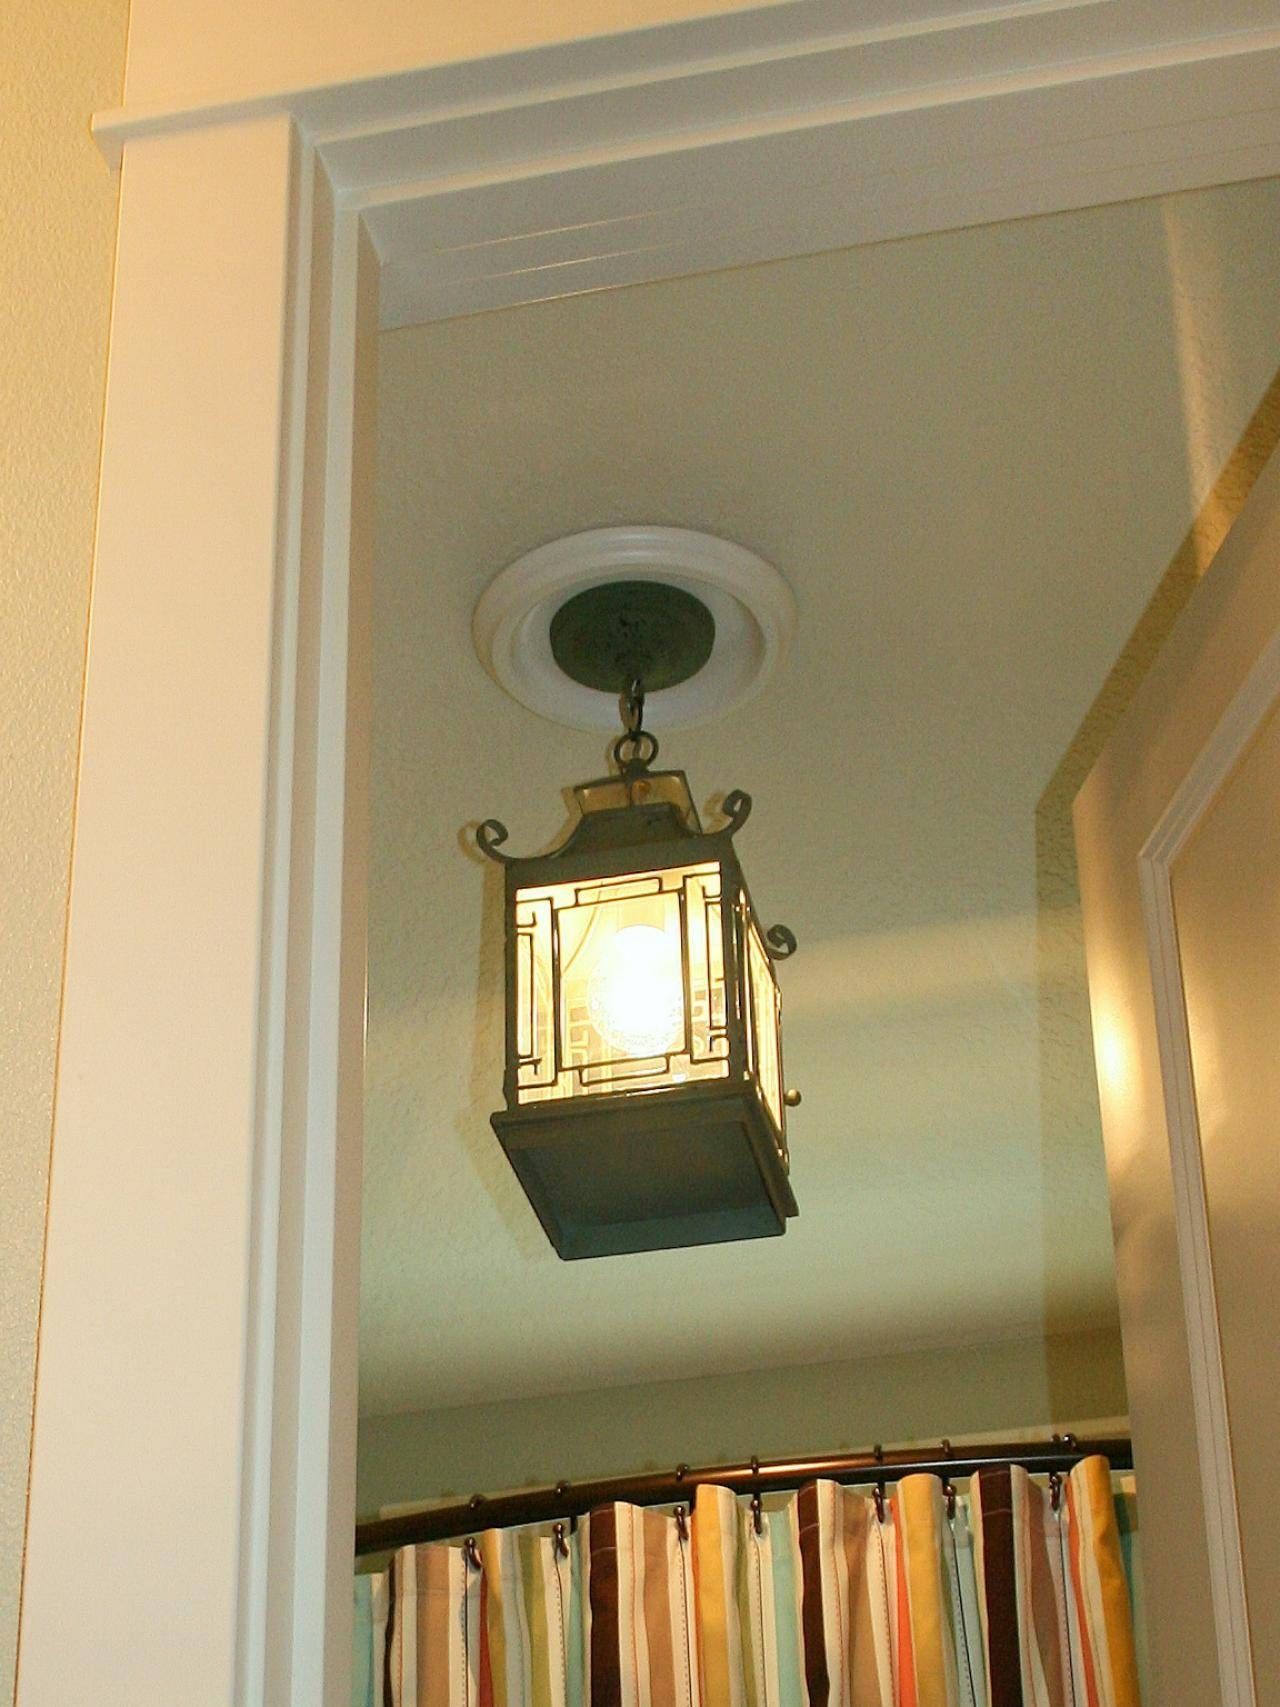 Replace Recessed Light With A Pendant Fixture | Hgtv Intended For Recessed Lights To Pendant (View 10 of 15)